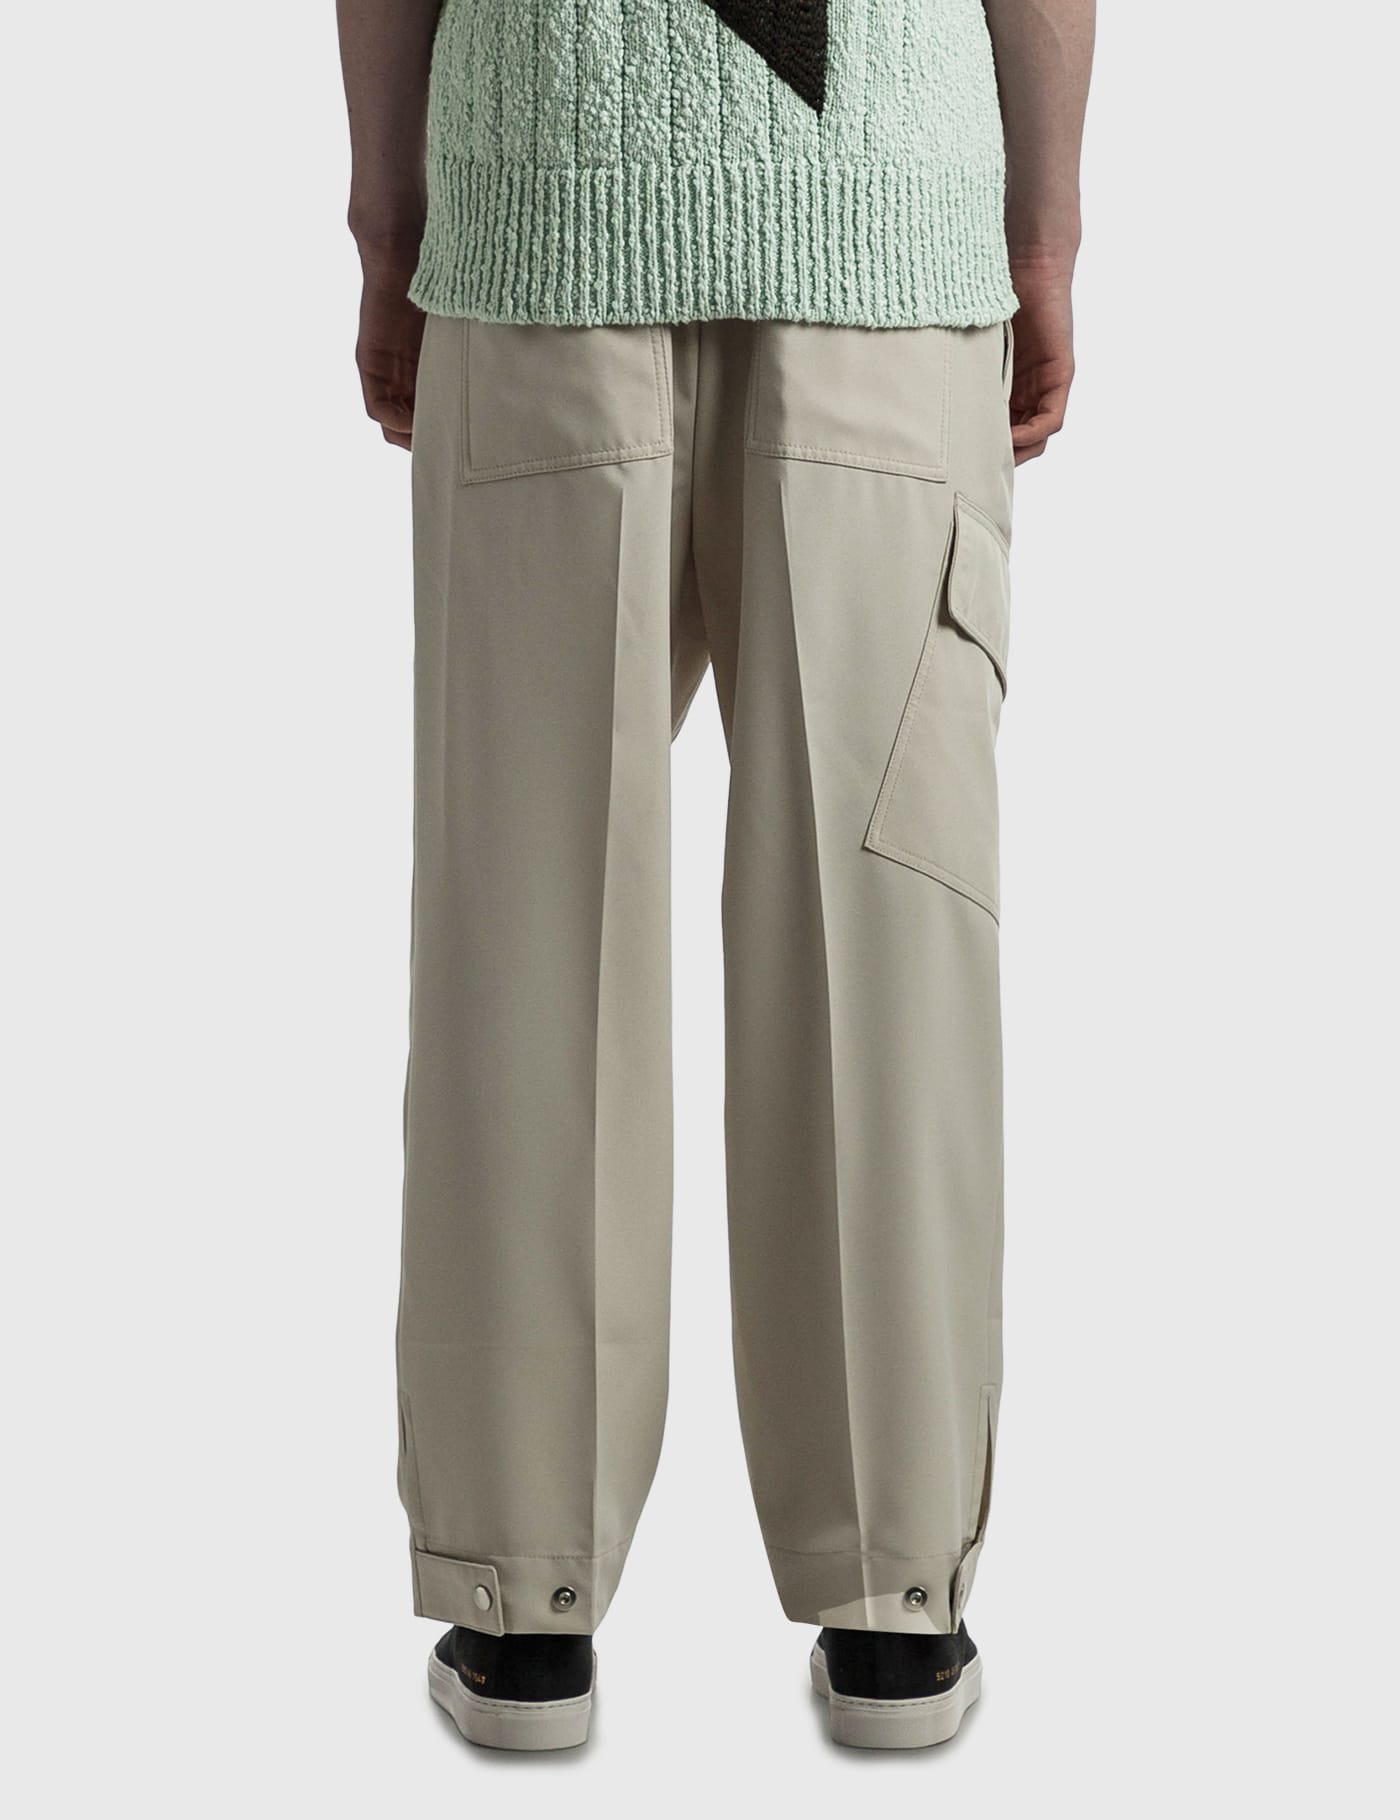 OAMC - Combine Trousers | HBX - Globally Curated Fashion and